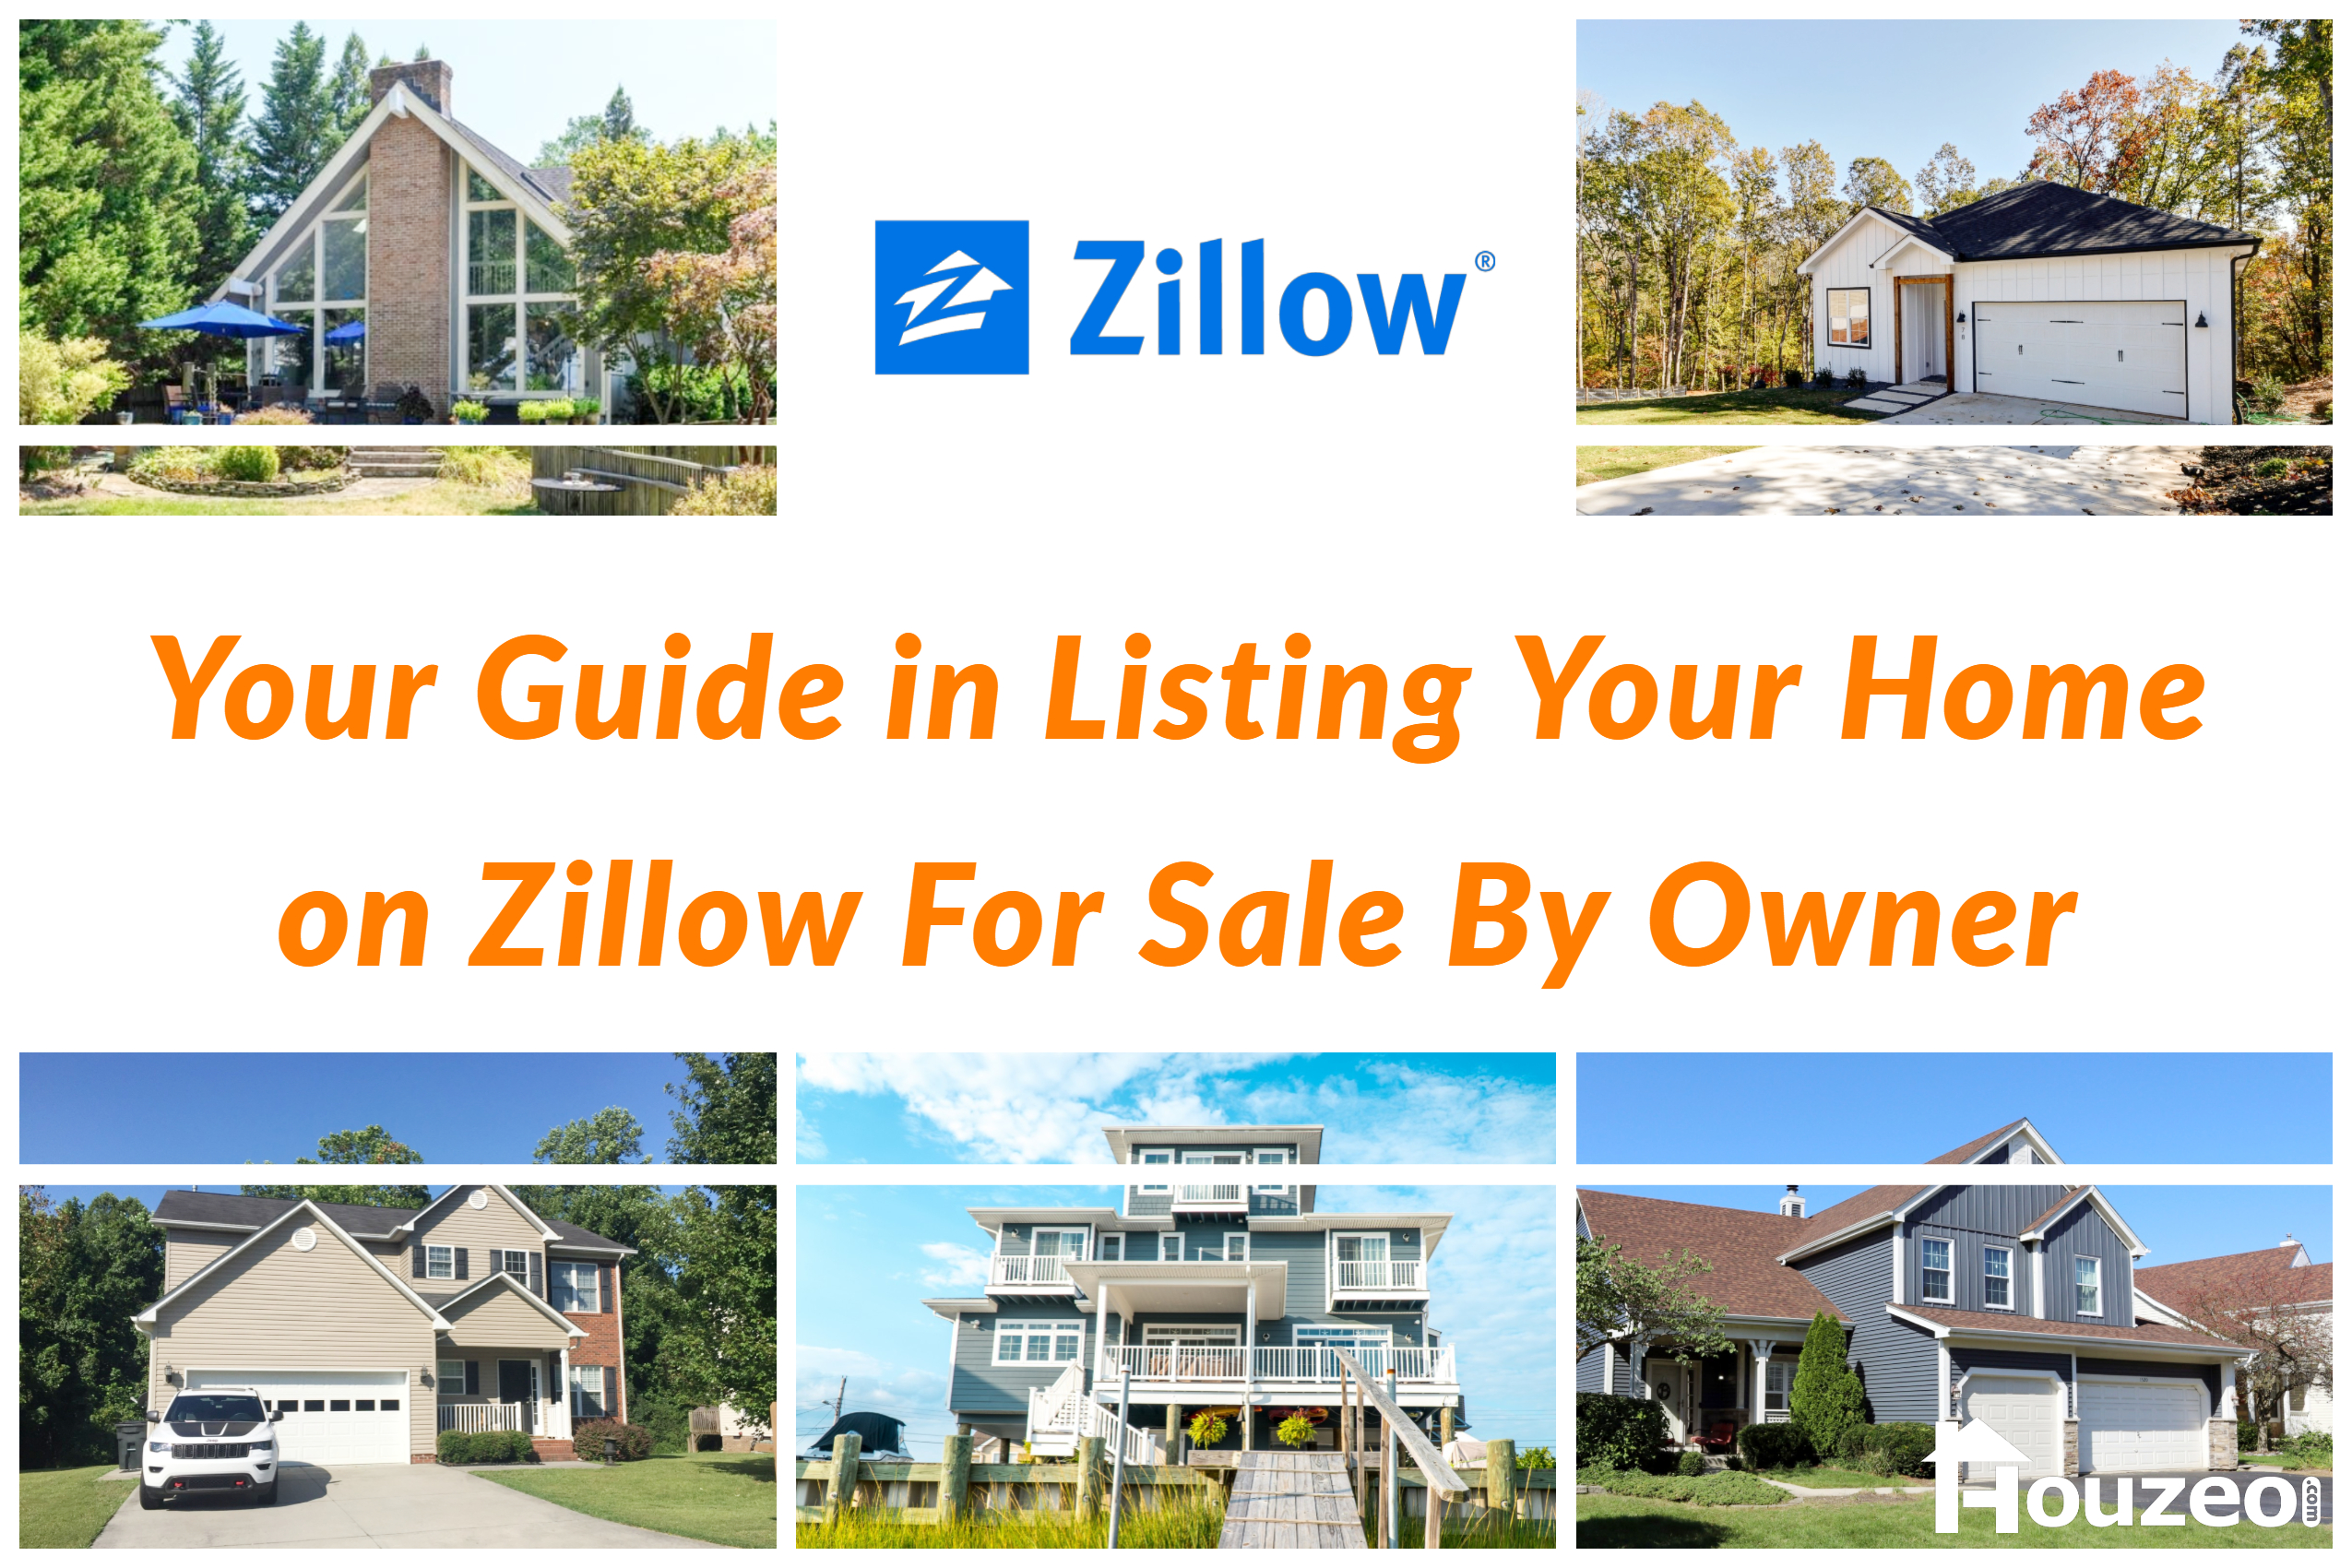 WI Real Estate - Wisconsin Homes For Sale - Zillow